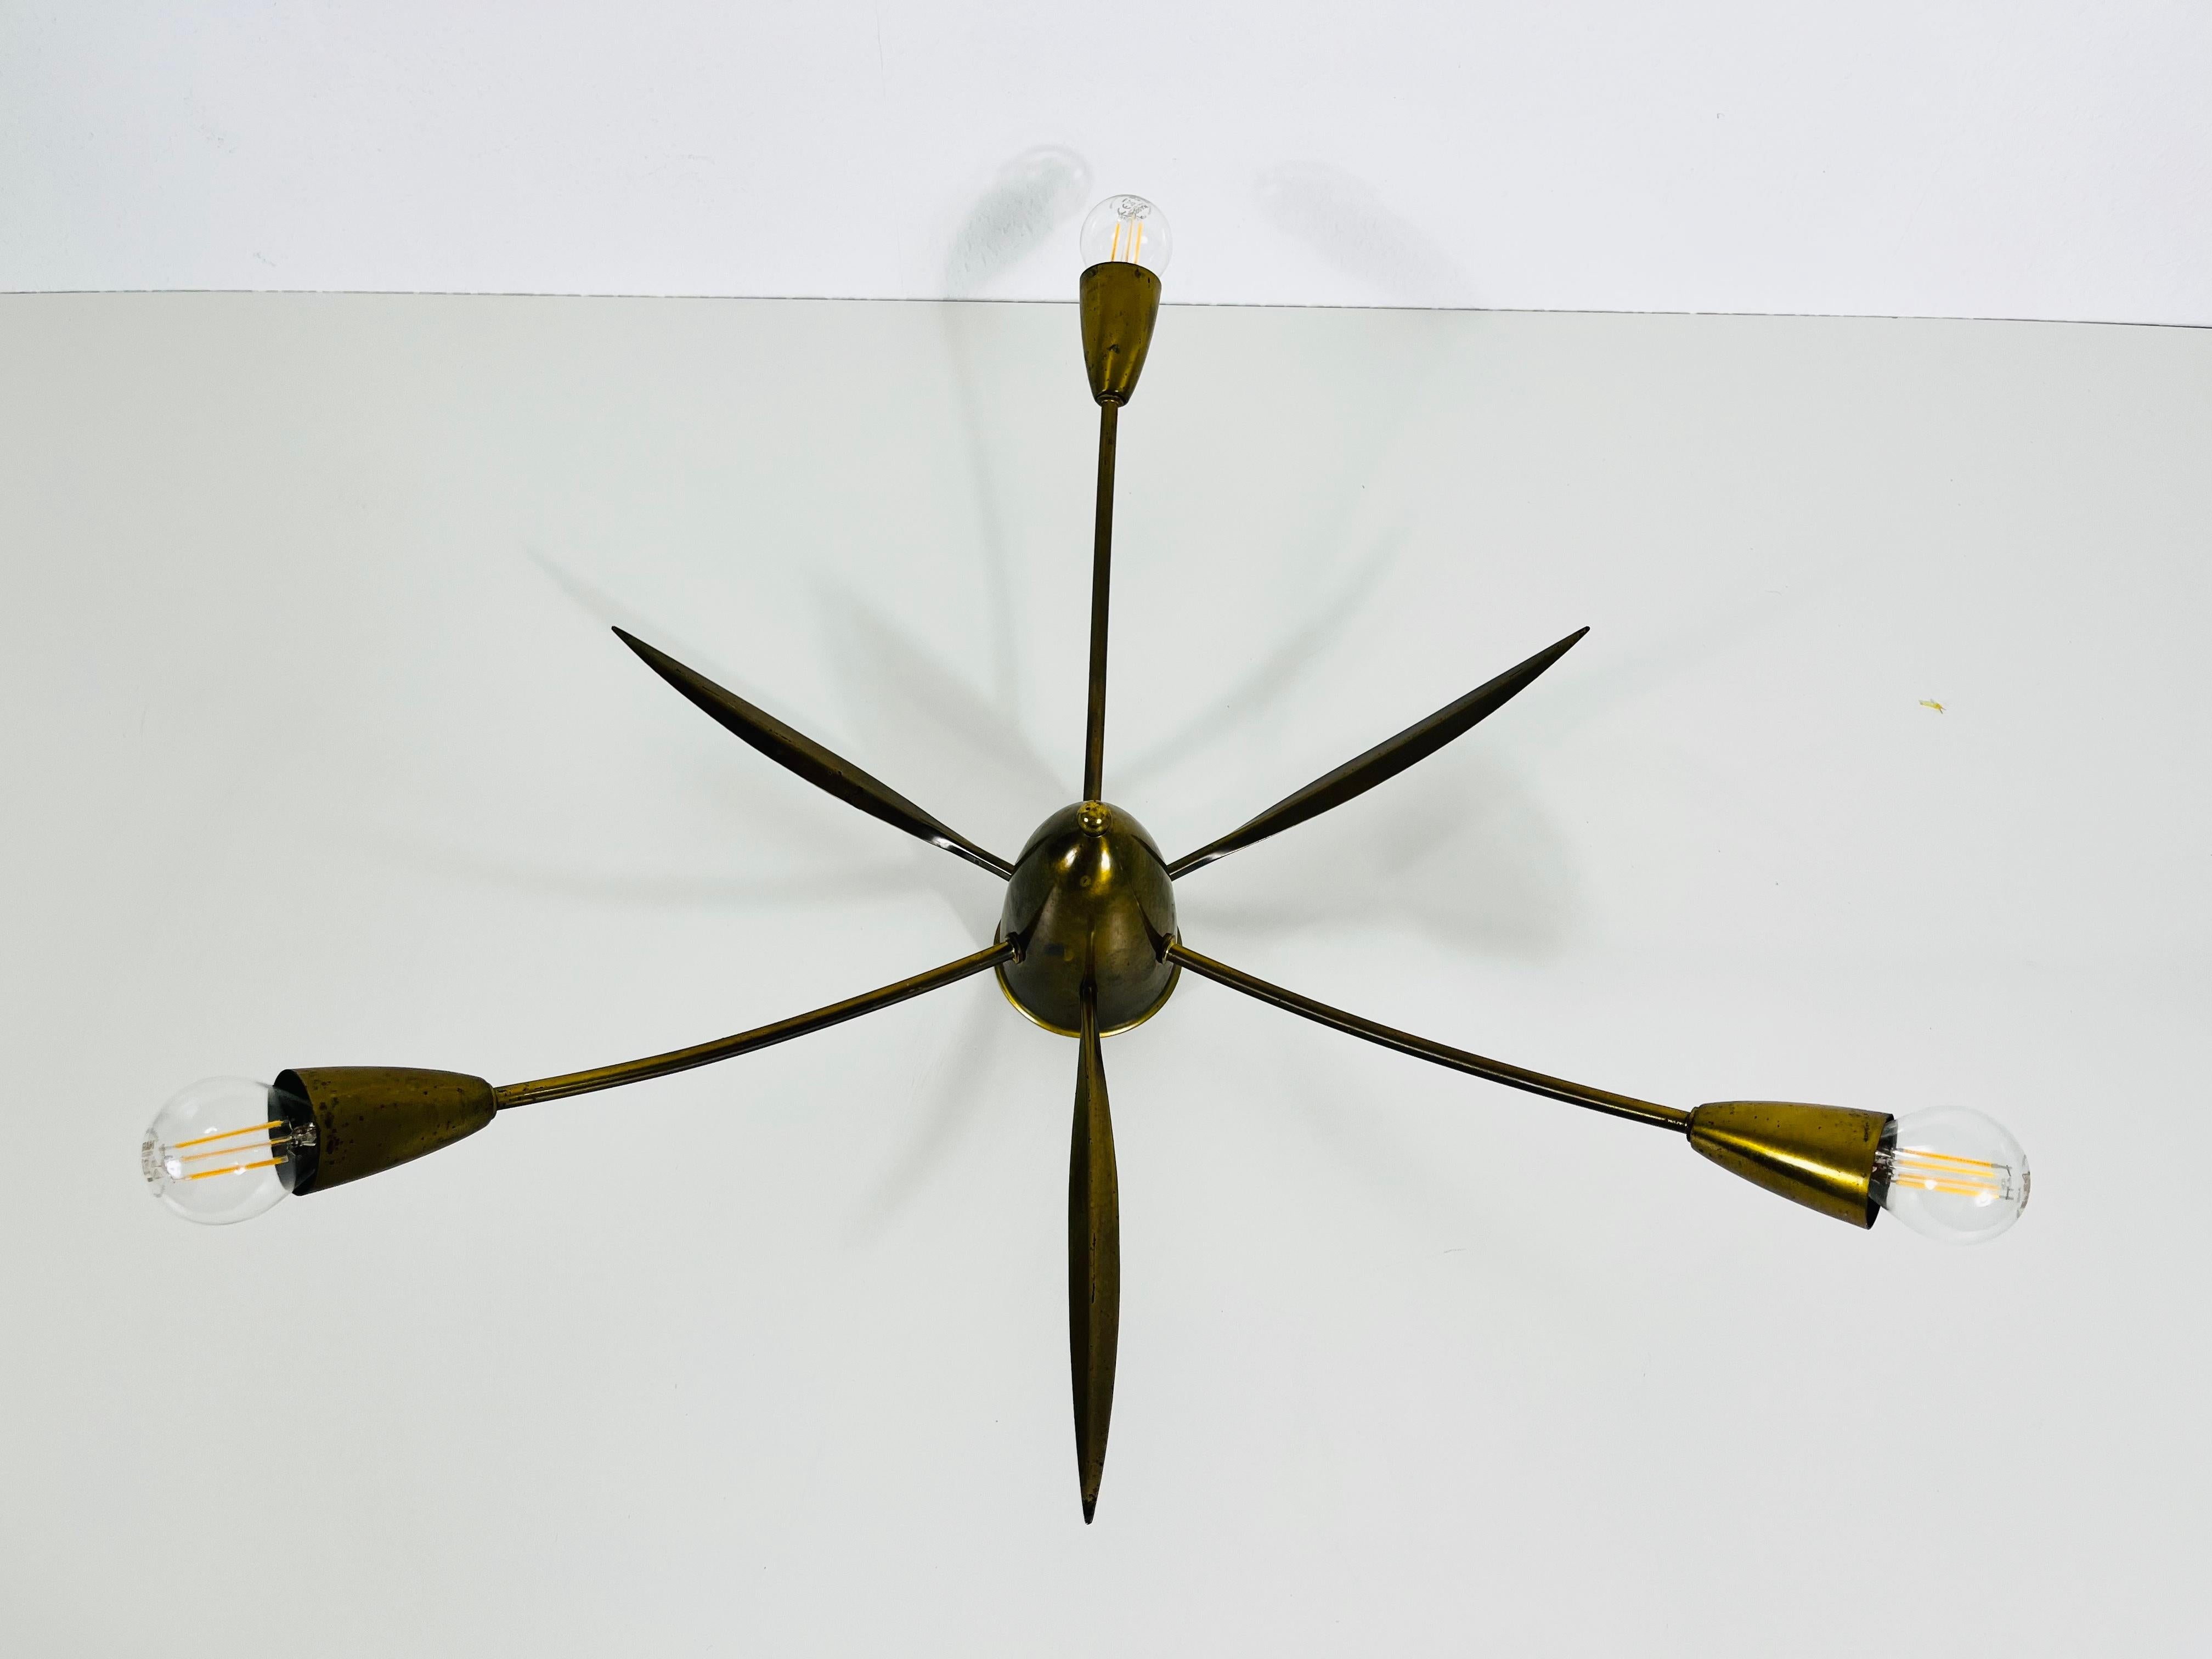 A Sputnik chandelier made in Germany in the 1950s. It is fascinating with its three brass arms, each of it with an E14 light bulb. The shape of the light is similar to a spider.

The light requires 3 E14 light bulbs. Very good vintage